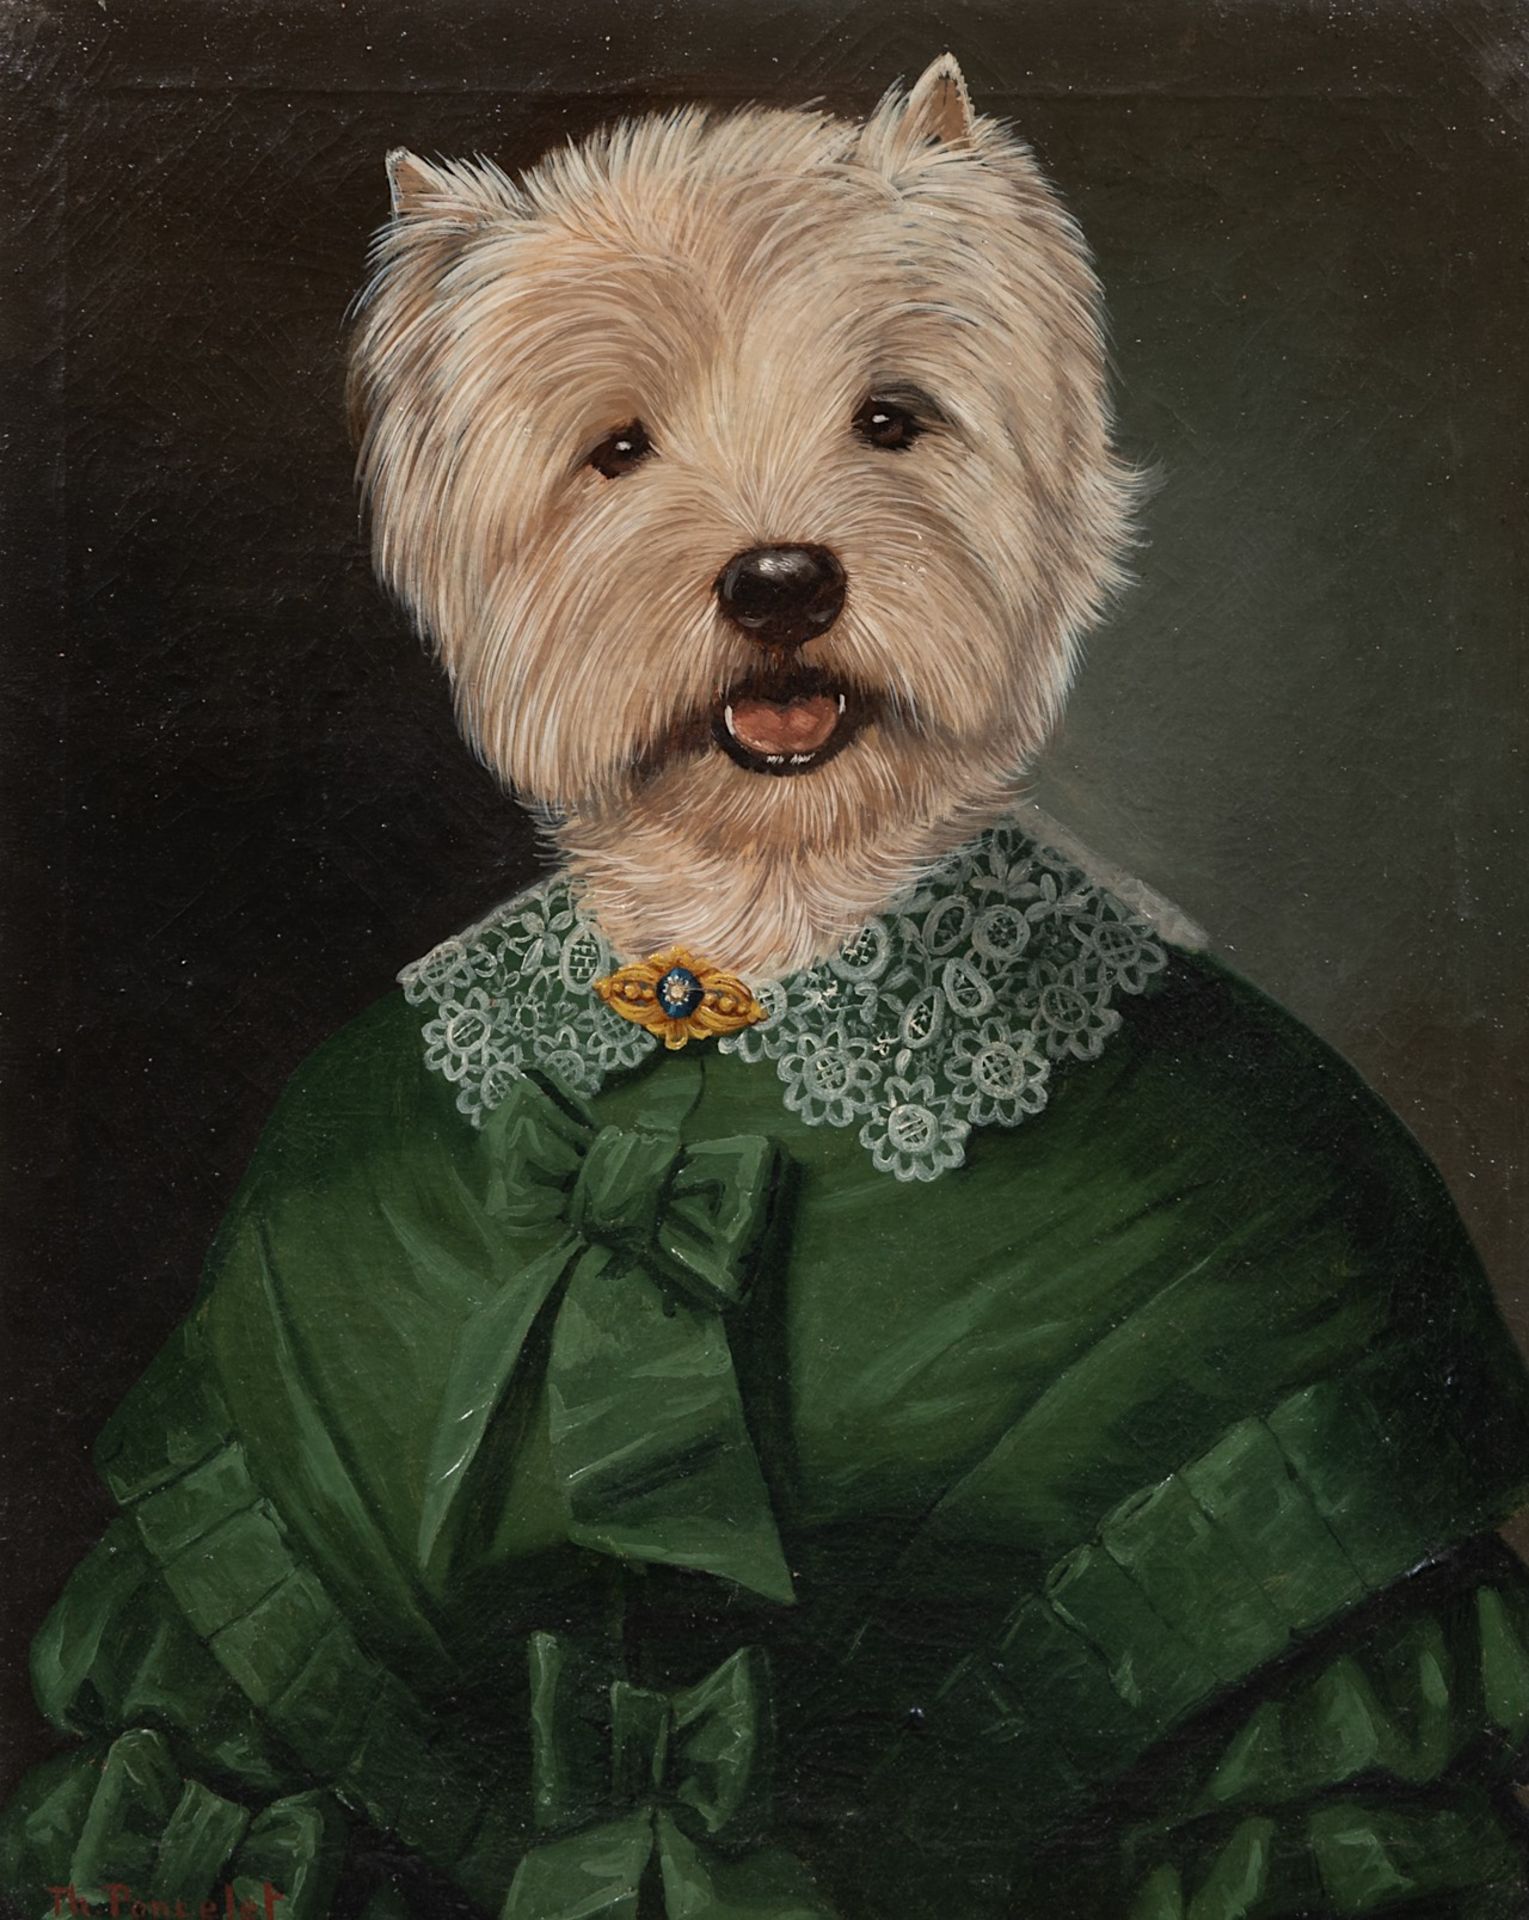 Thierry Poncelet (1946), the portrait of Lady Yorkshire terrier, oil on canvas 54 x 43.5 cm. (21.2 x